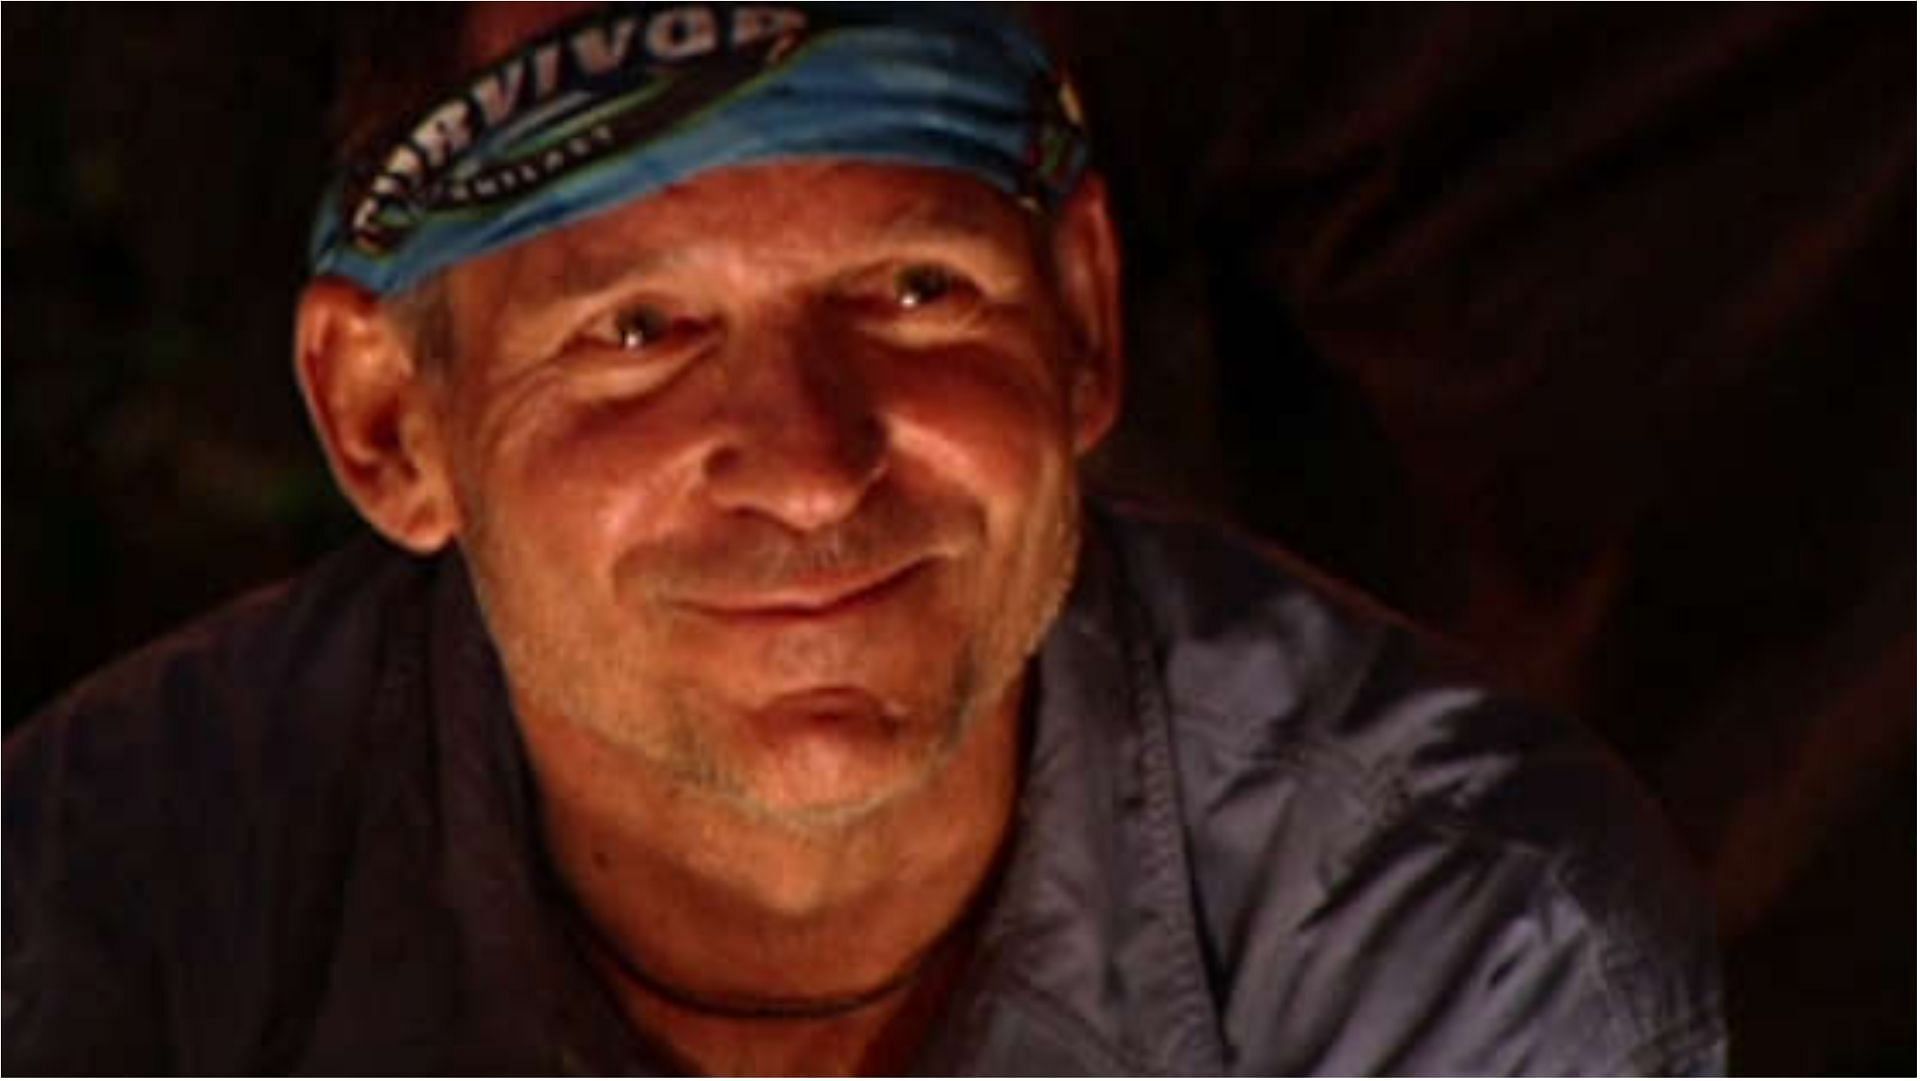 Roger Sexton was known for his appearance on the reality show Survivor (Image via JamieAgee6/Twitter)